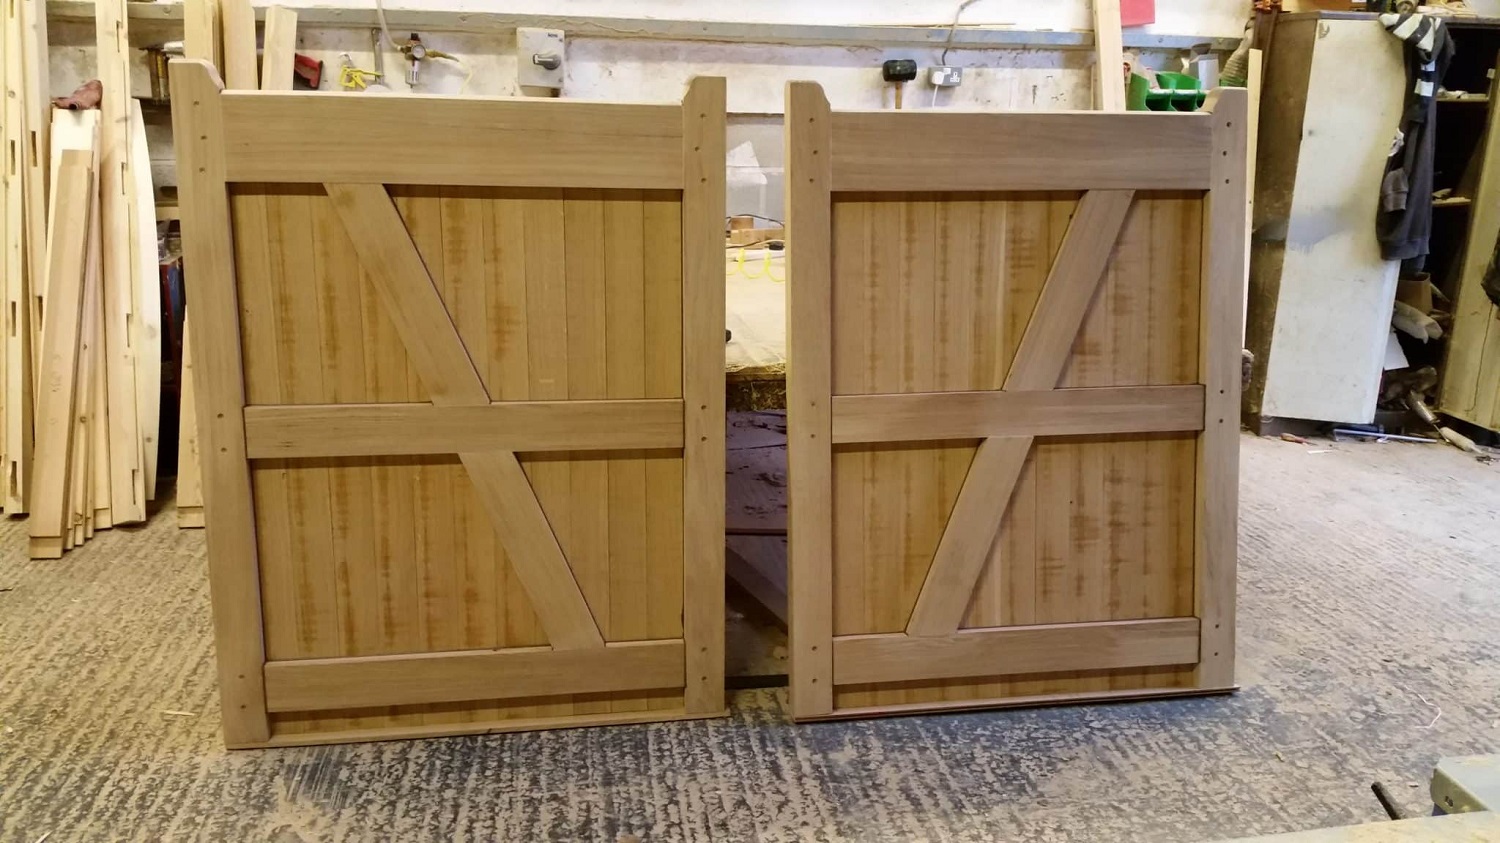 Double oak gate shown from the rear with diagonal bracing